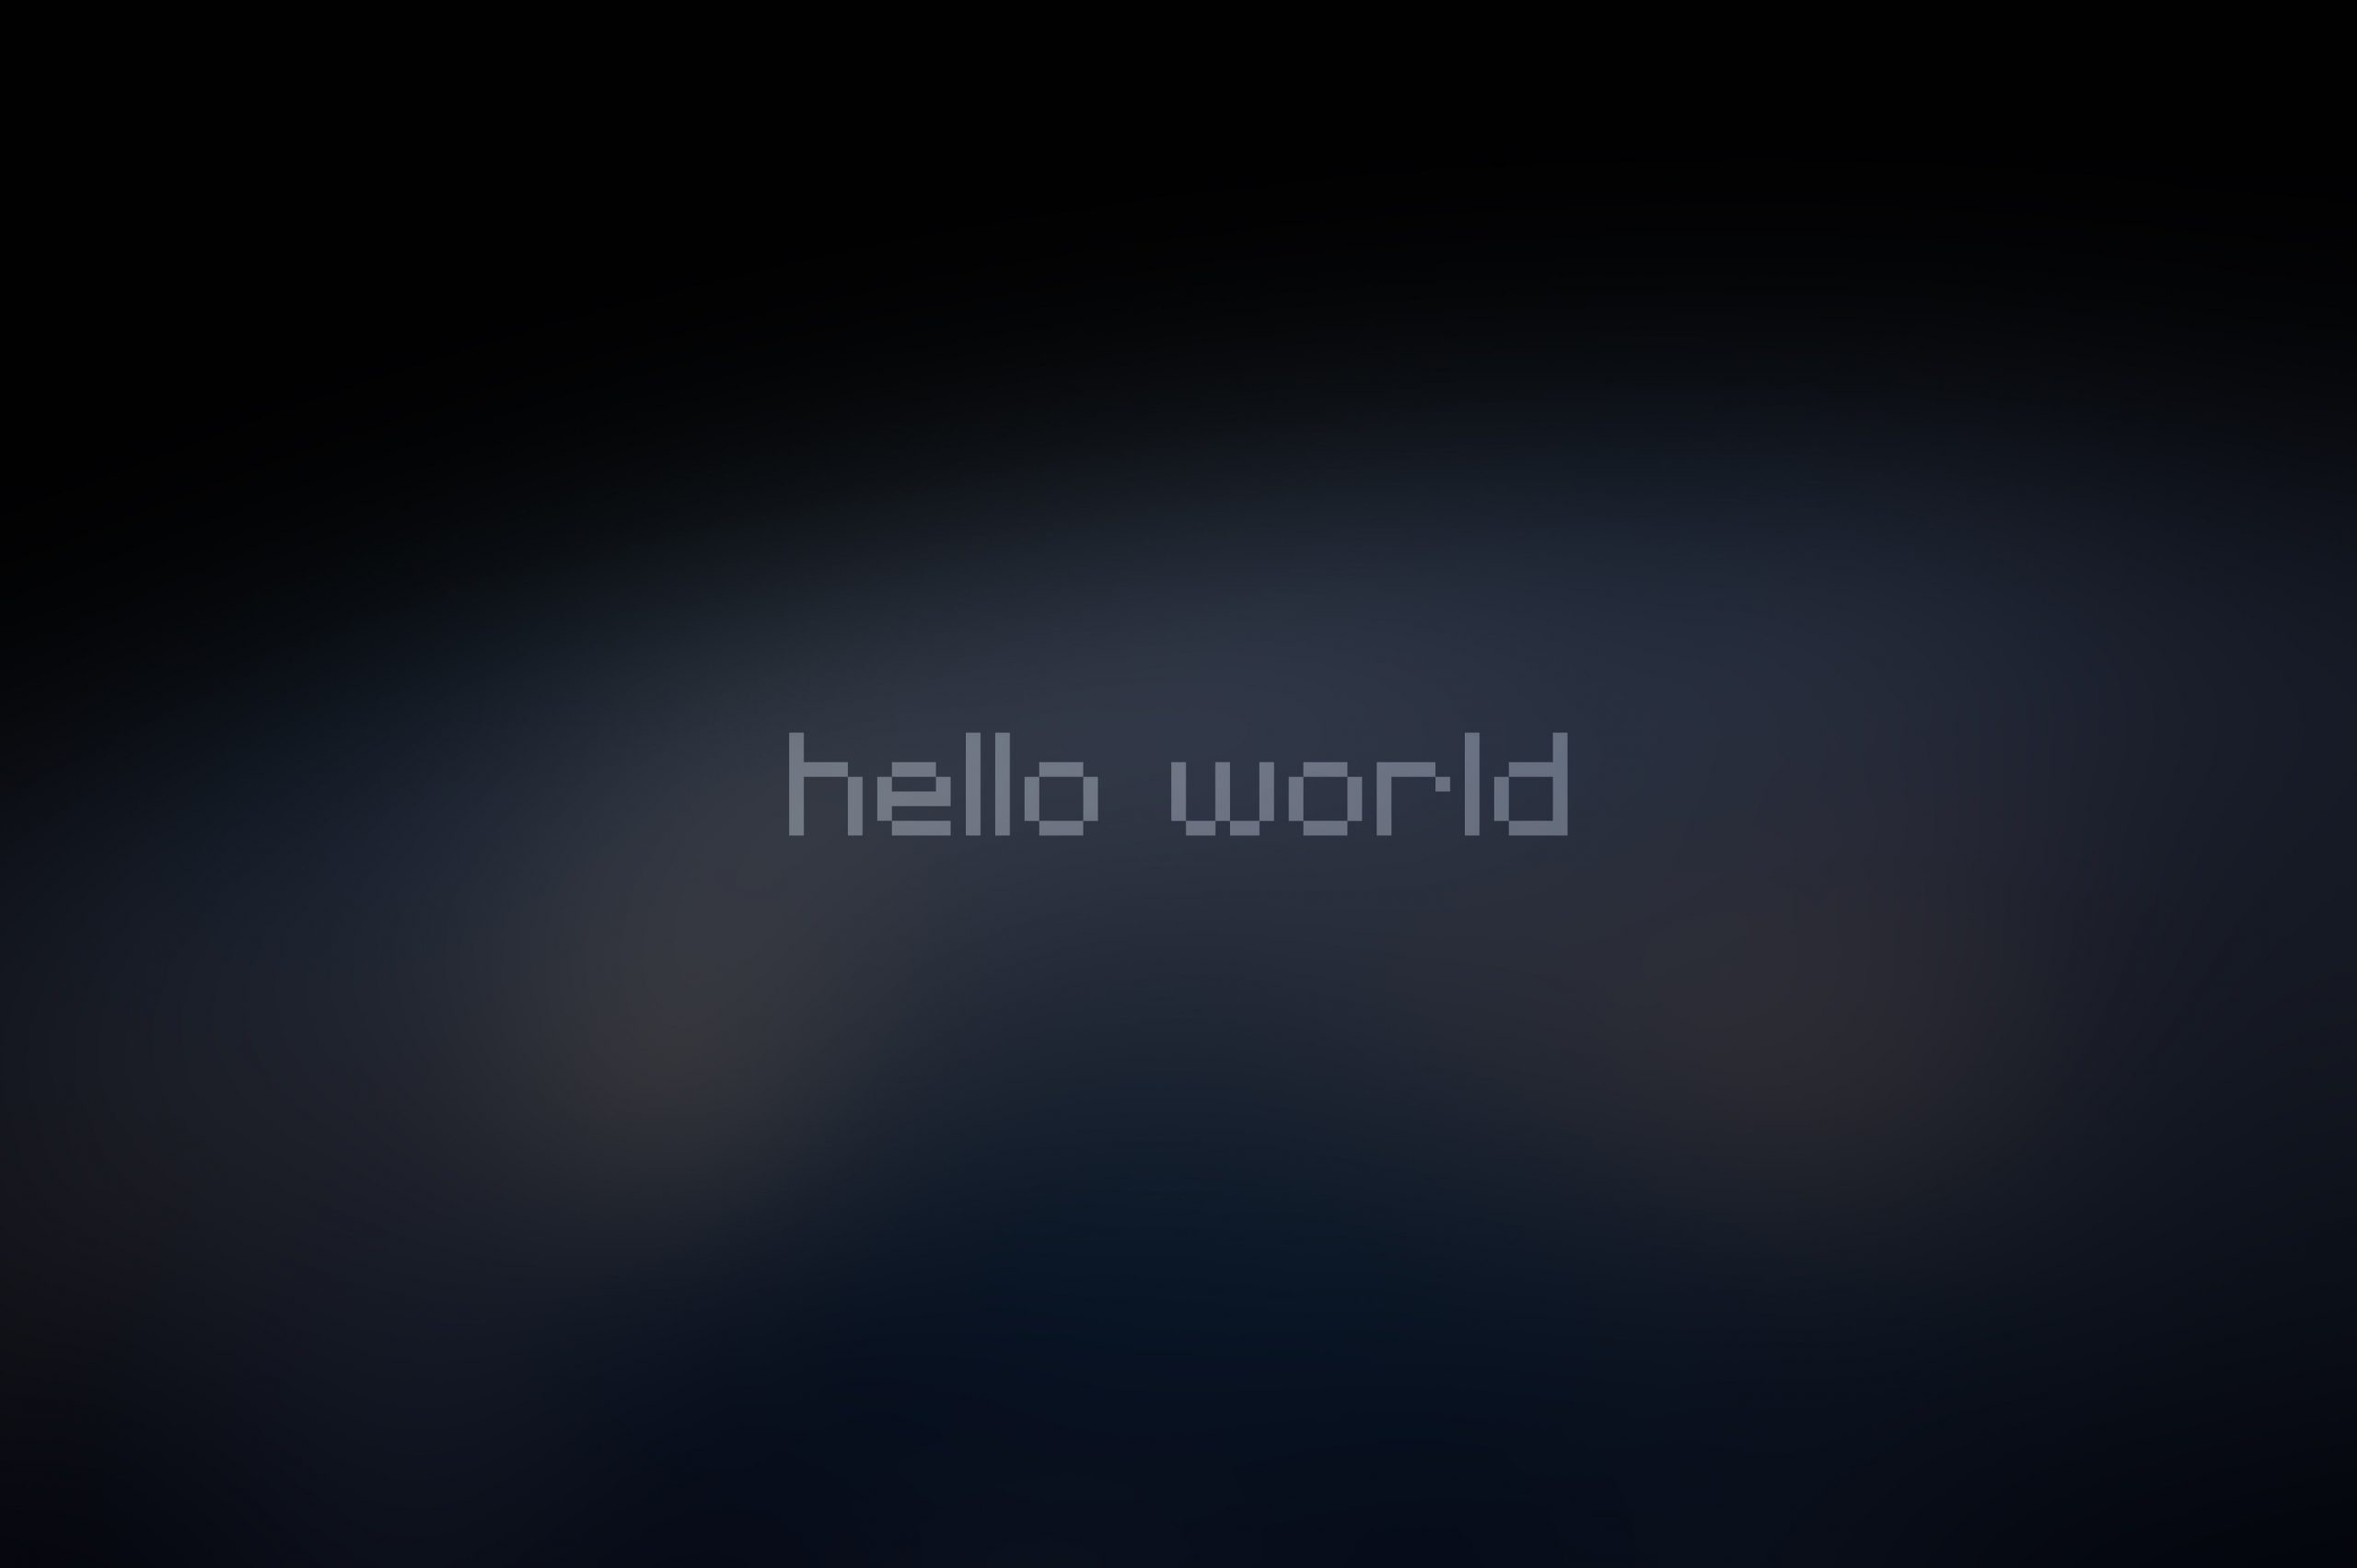 Wallpaper hello world text on gray background, simple background, quote